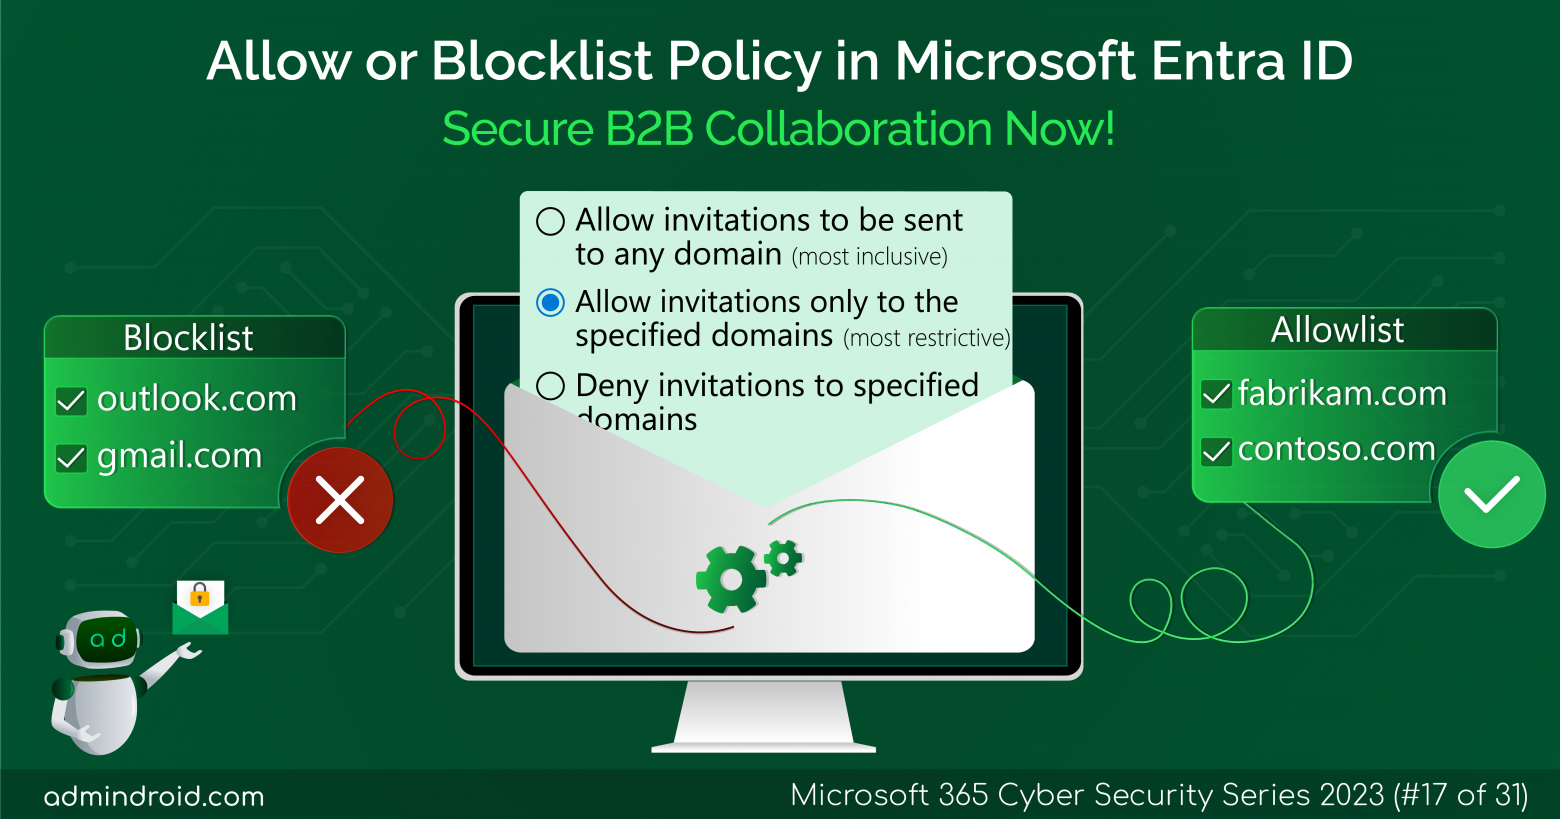 Set the Allow or BlockList Policy in Microsoft Entra ID